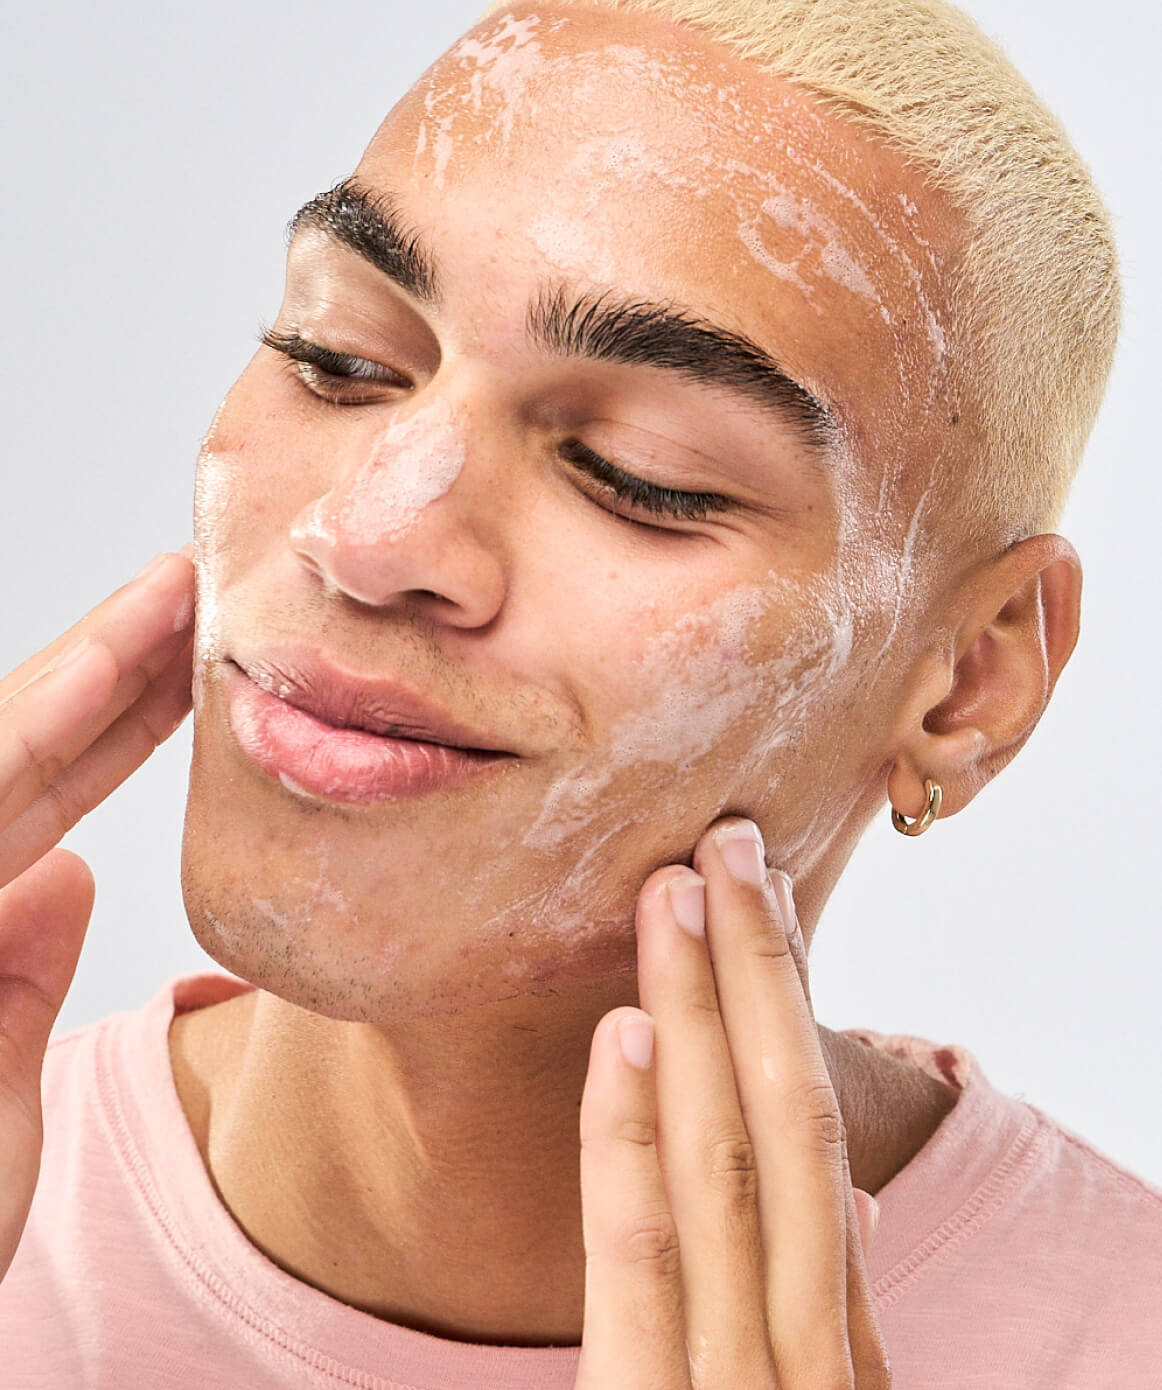 Male applying skincare product.